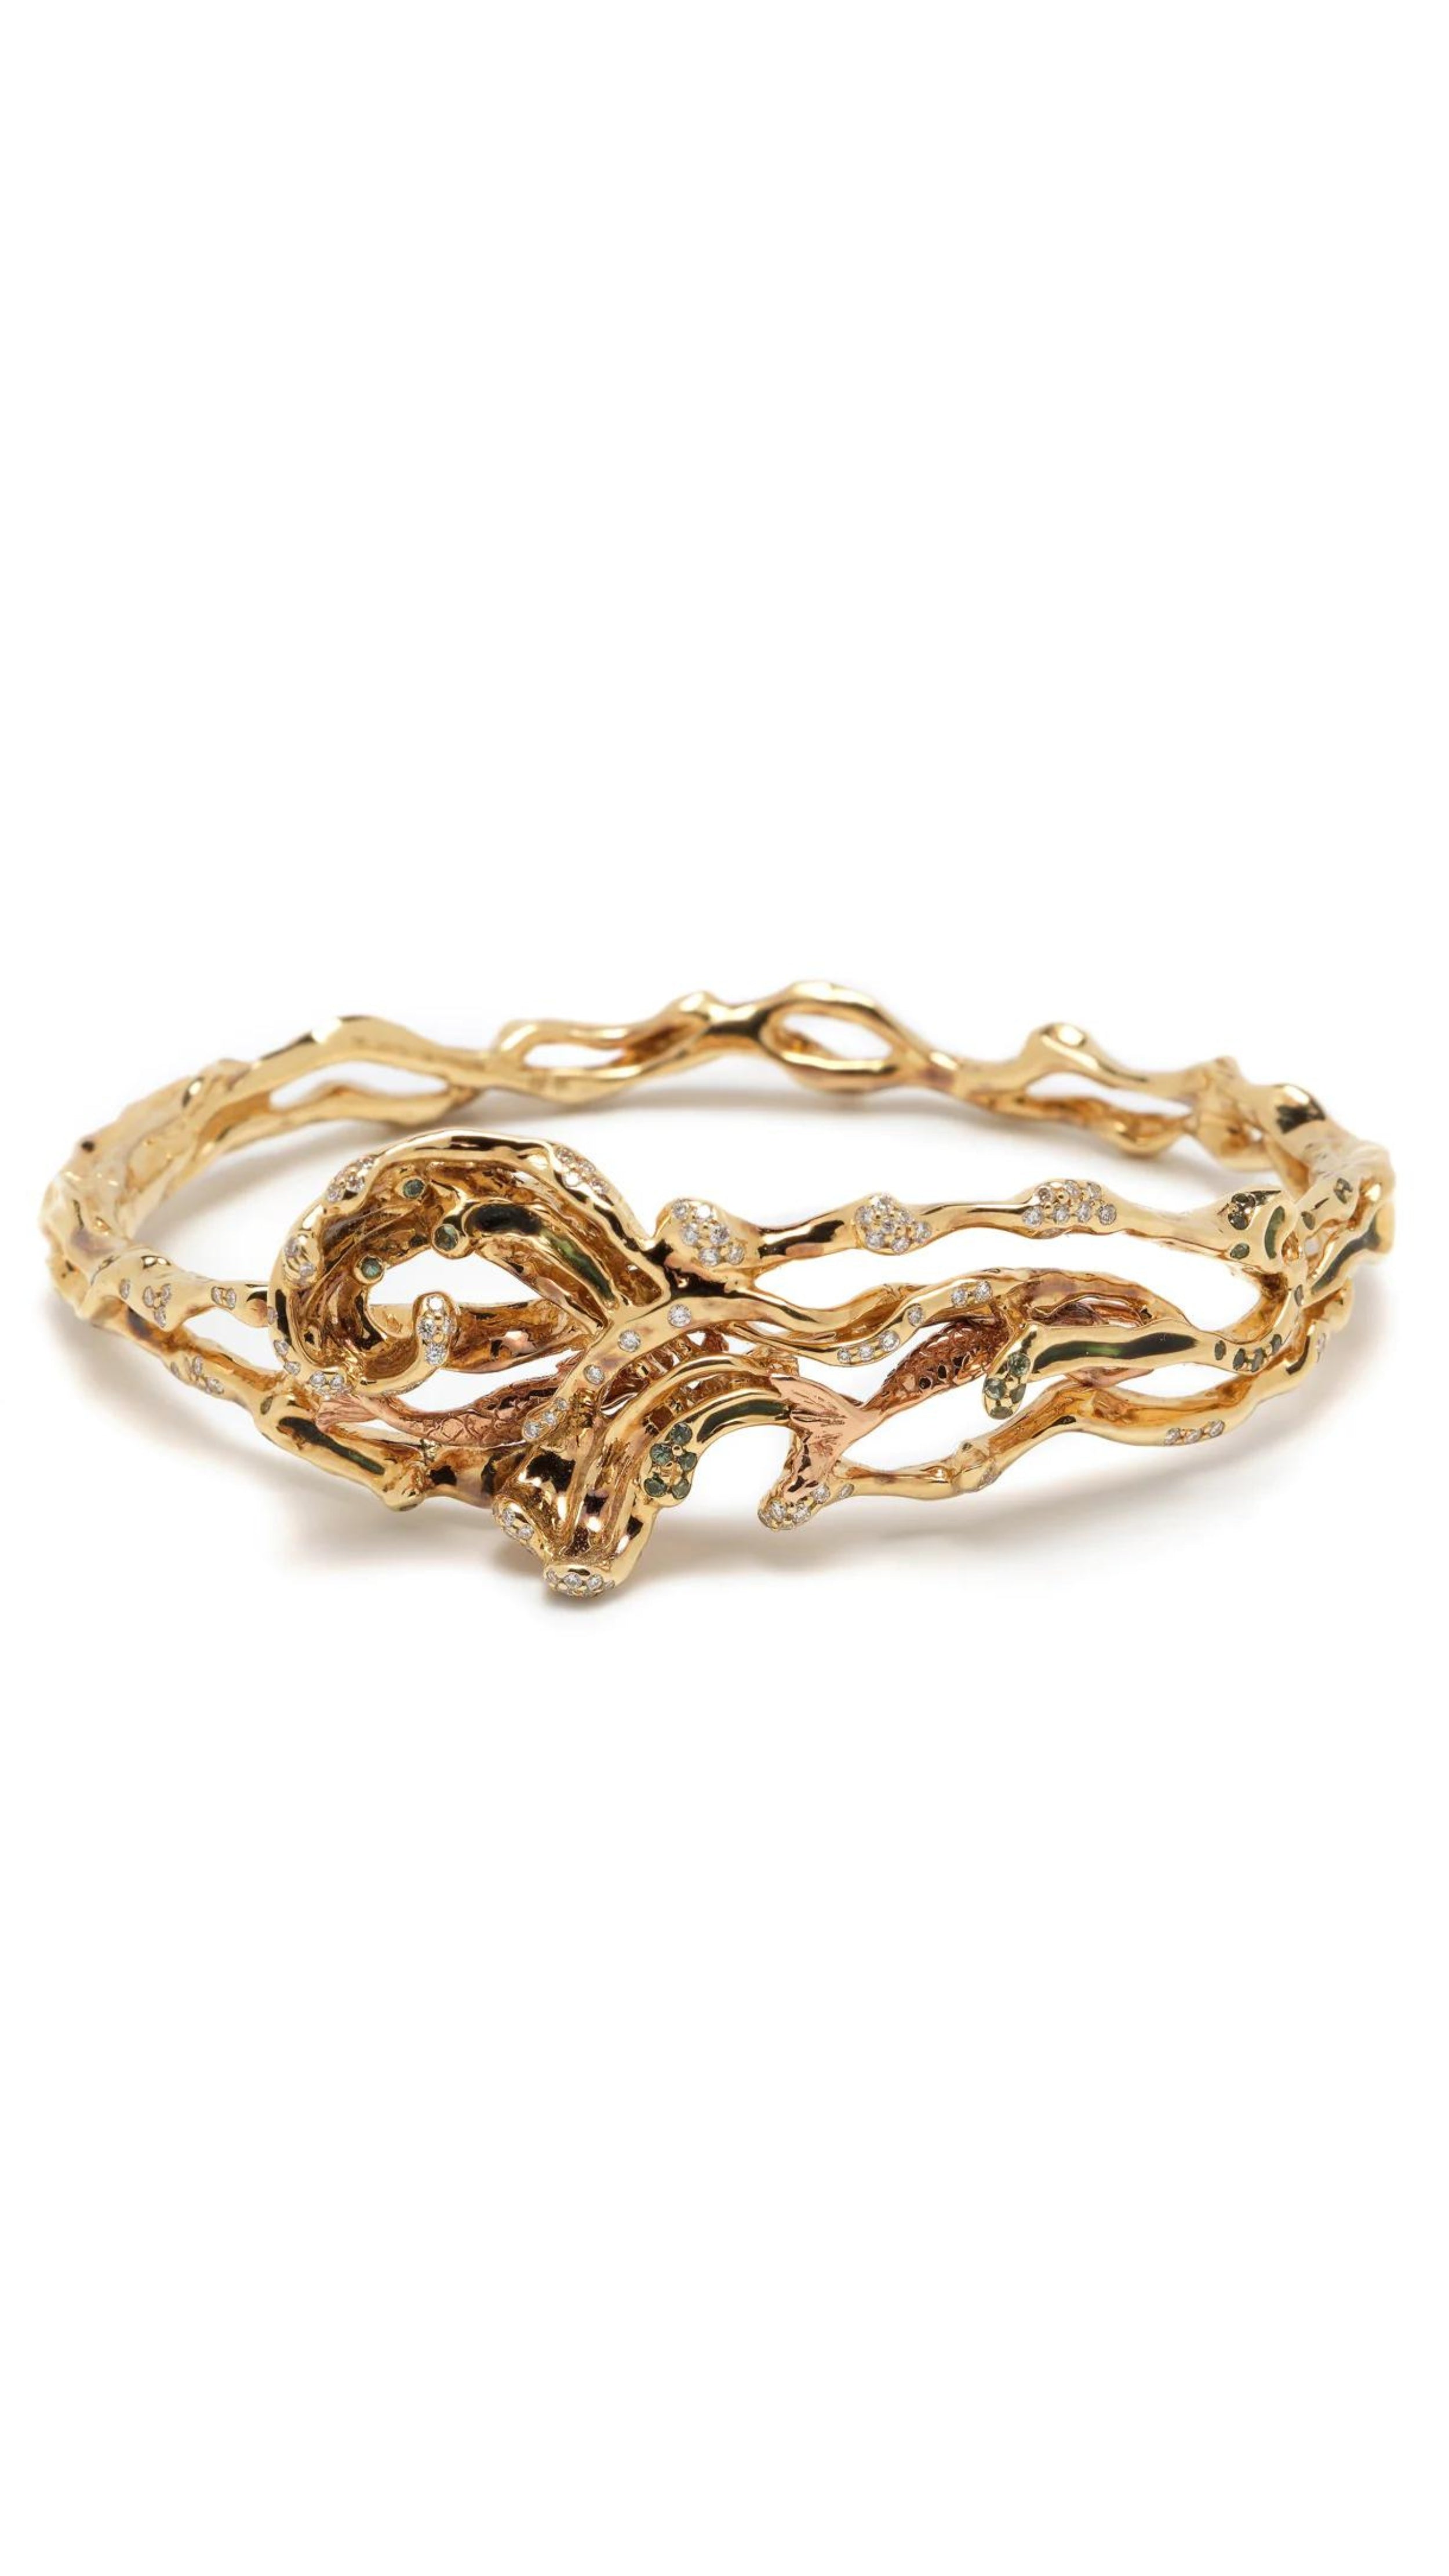 Bibi van der Velden, Sea Kelp Bracelet. This beautifully crafted Sea Kelp Bracelet is made with 18k yellow gold and features olive-green sapphires and enameling. Subtle accents of white diamonds and a mesmerizing 18k rose gold mermaid complete the look. Shown from the front.